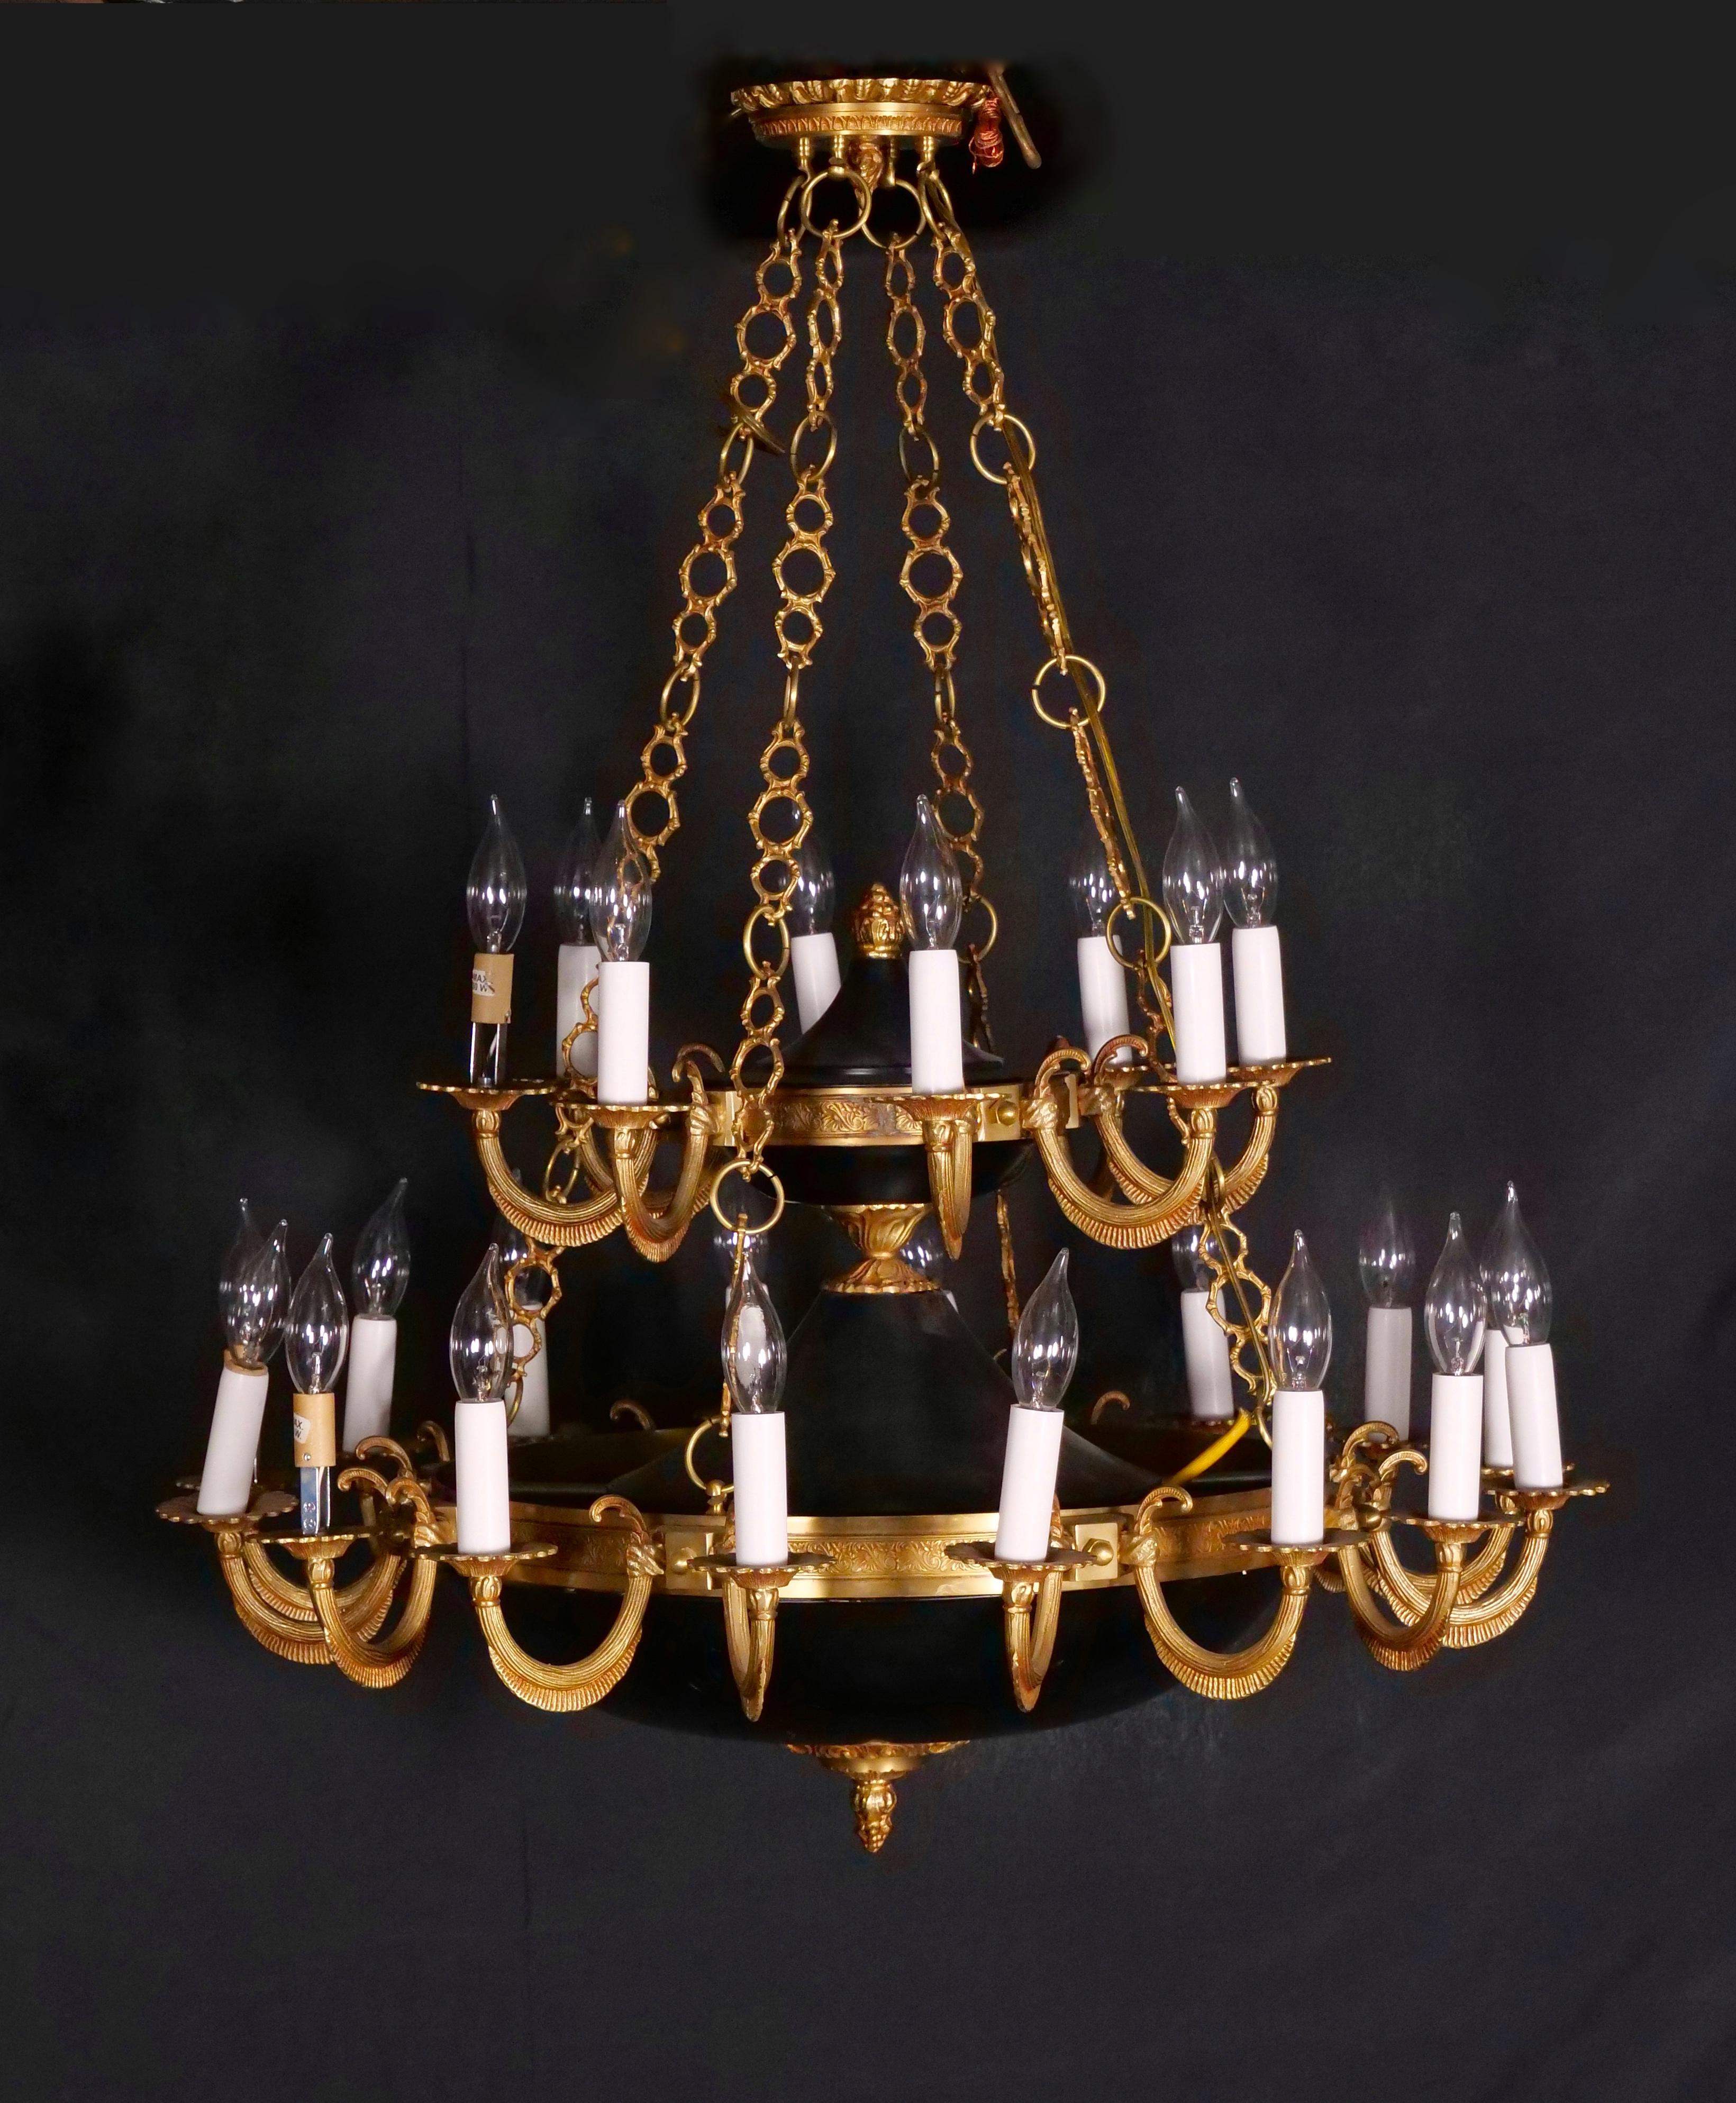 19th Century French Empire Style 24-Light Gilt Bronze / Patinated Chandelier For Sale 7